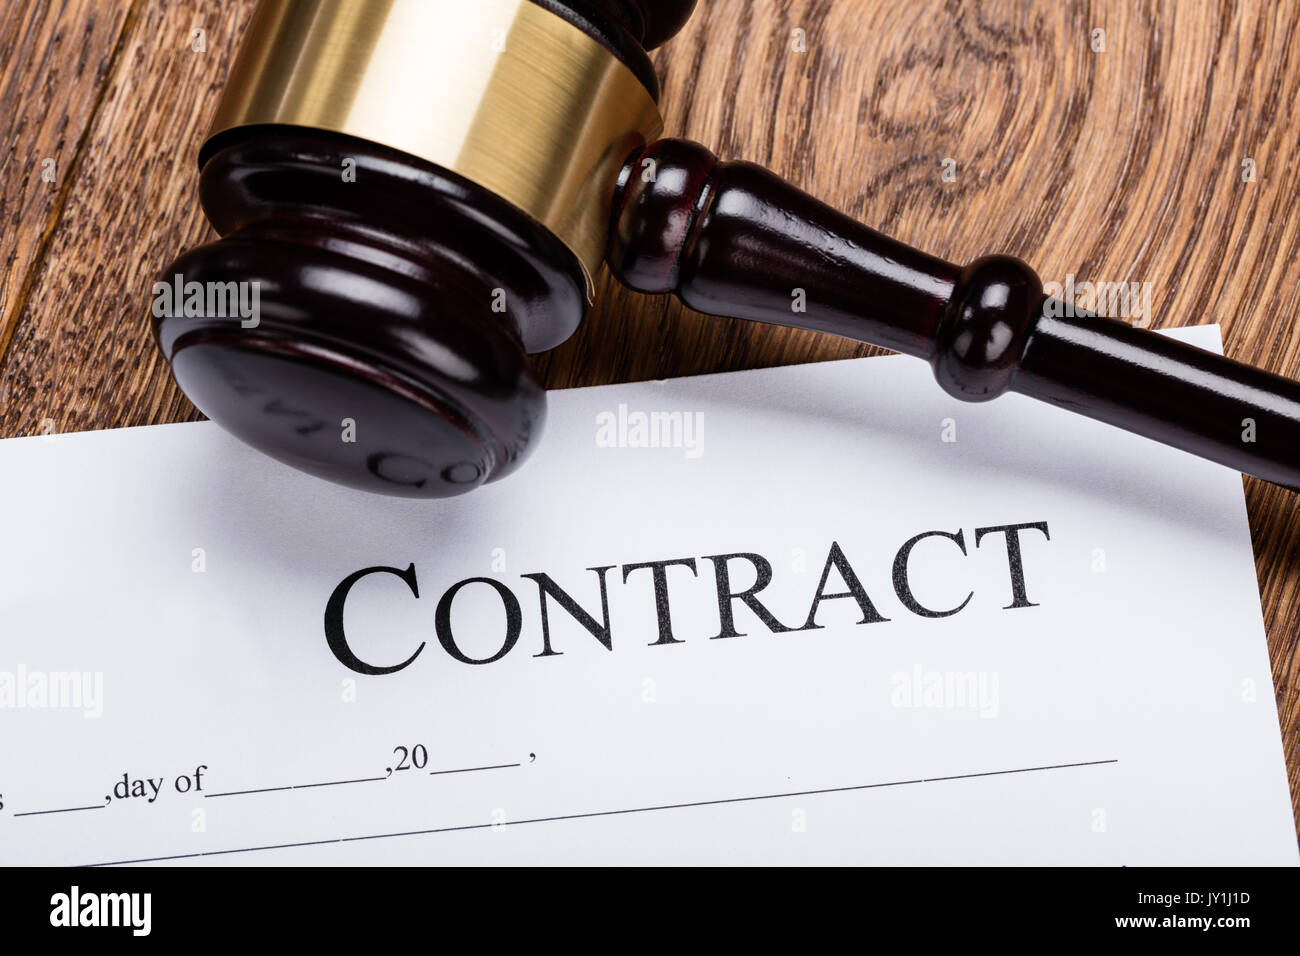 High Angle View Of Wooden Gavel On Contract Paper Stock Photo